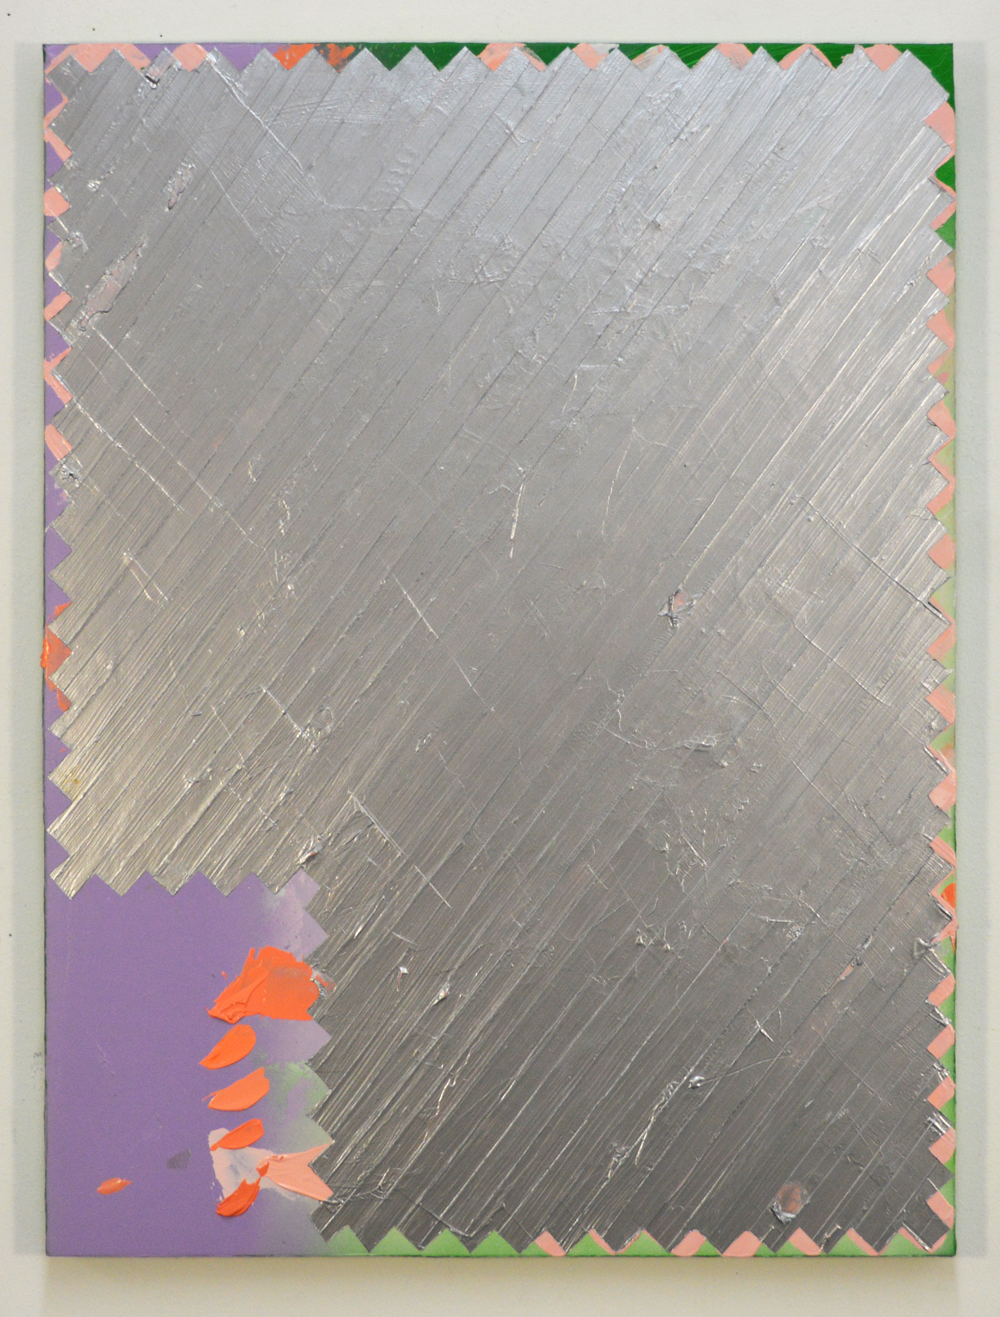  Untitled  Acrylic, spray paint on panel  24 x 18 in  2013 